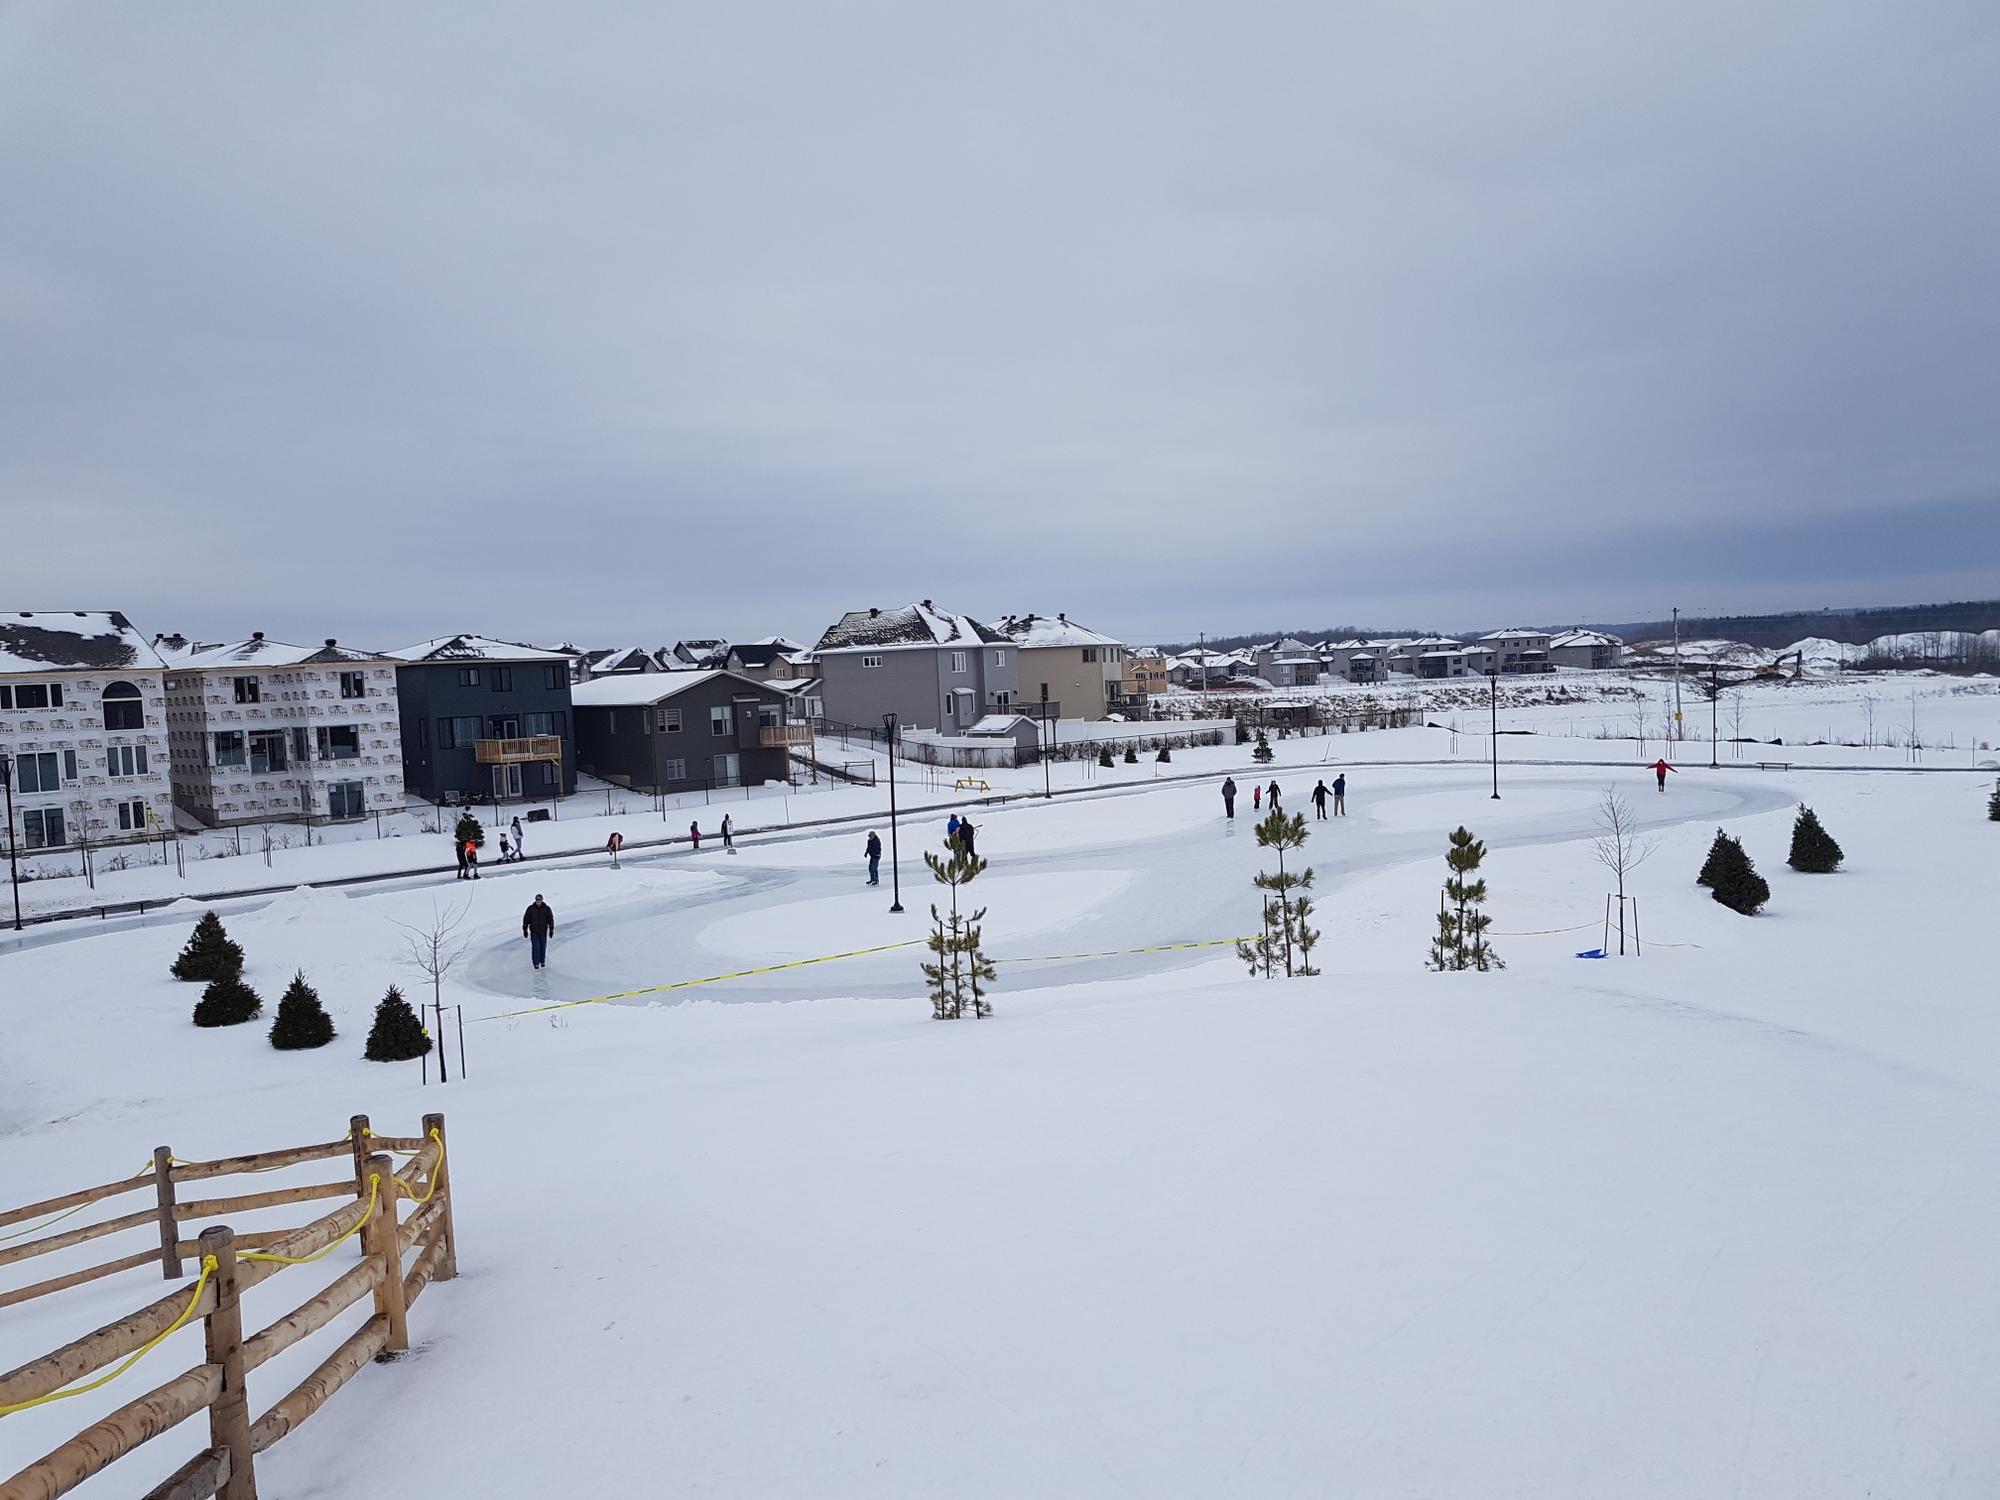 Skate path, sledding hill at winter-themed park in Clarence-Rockland